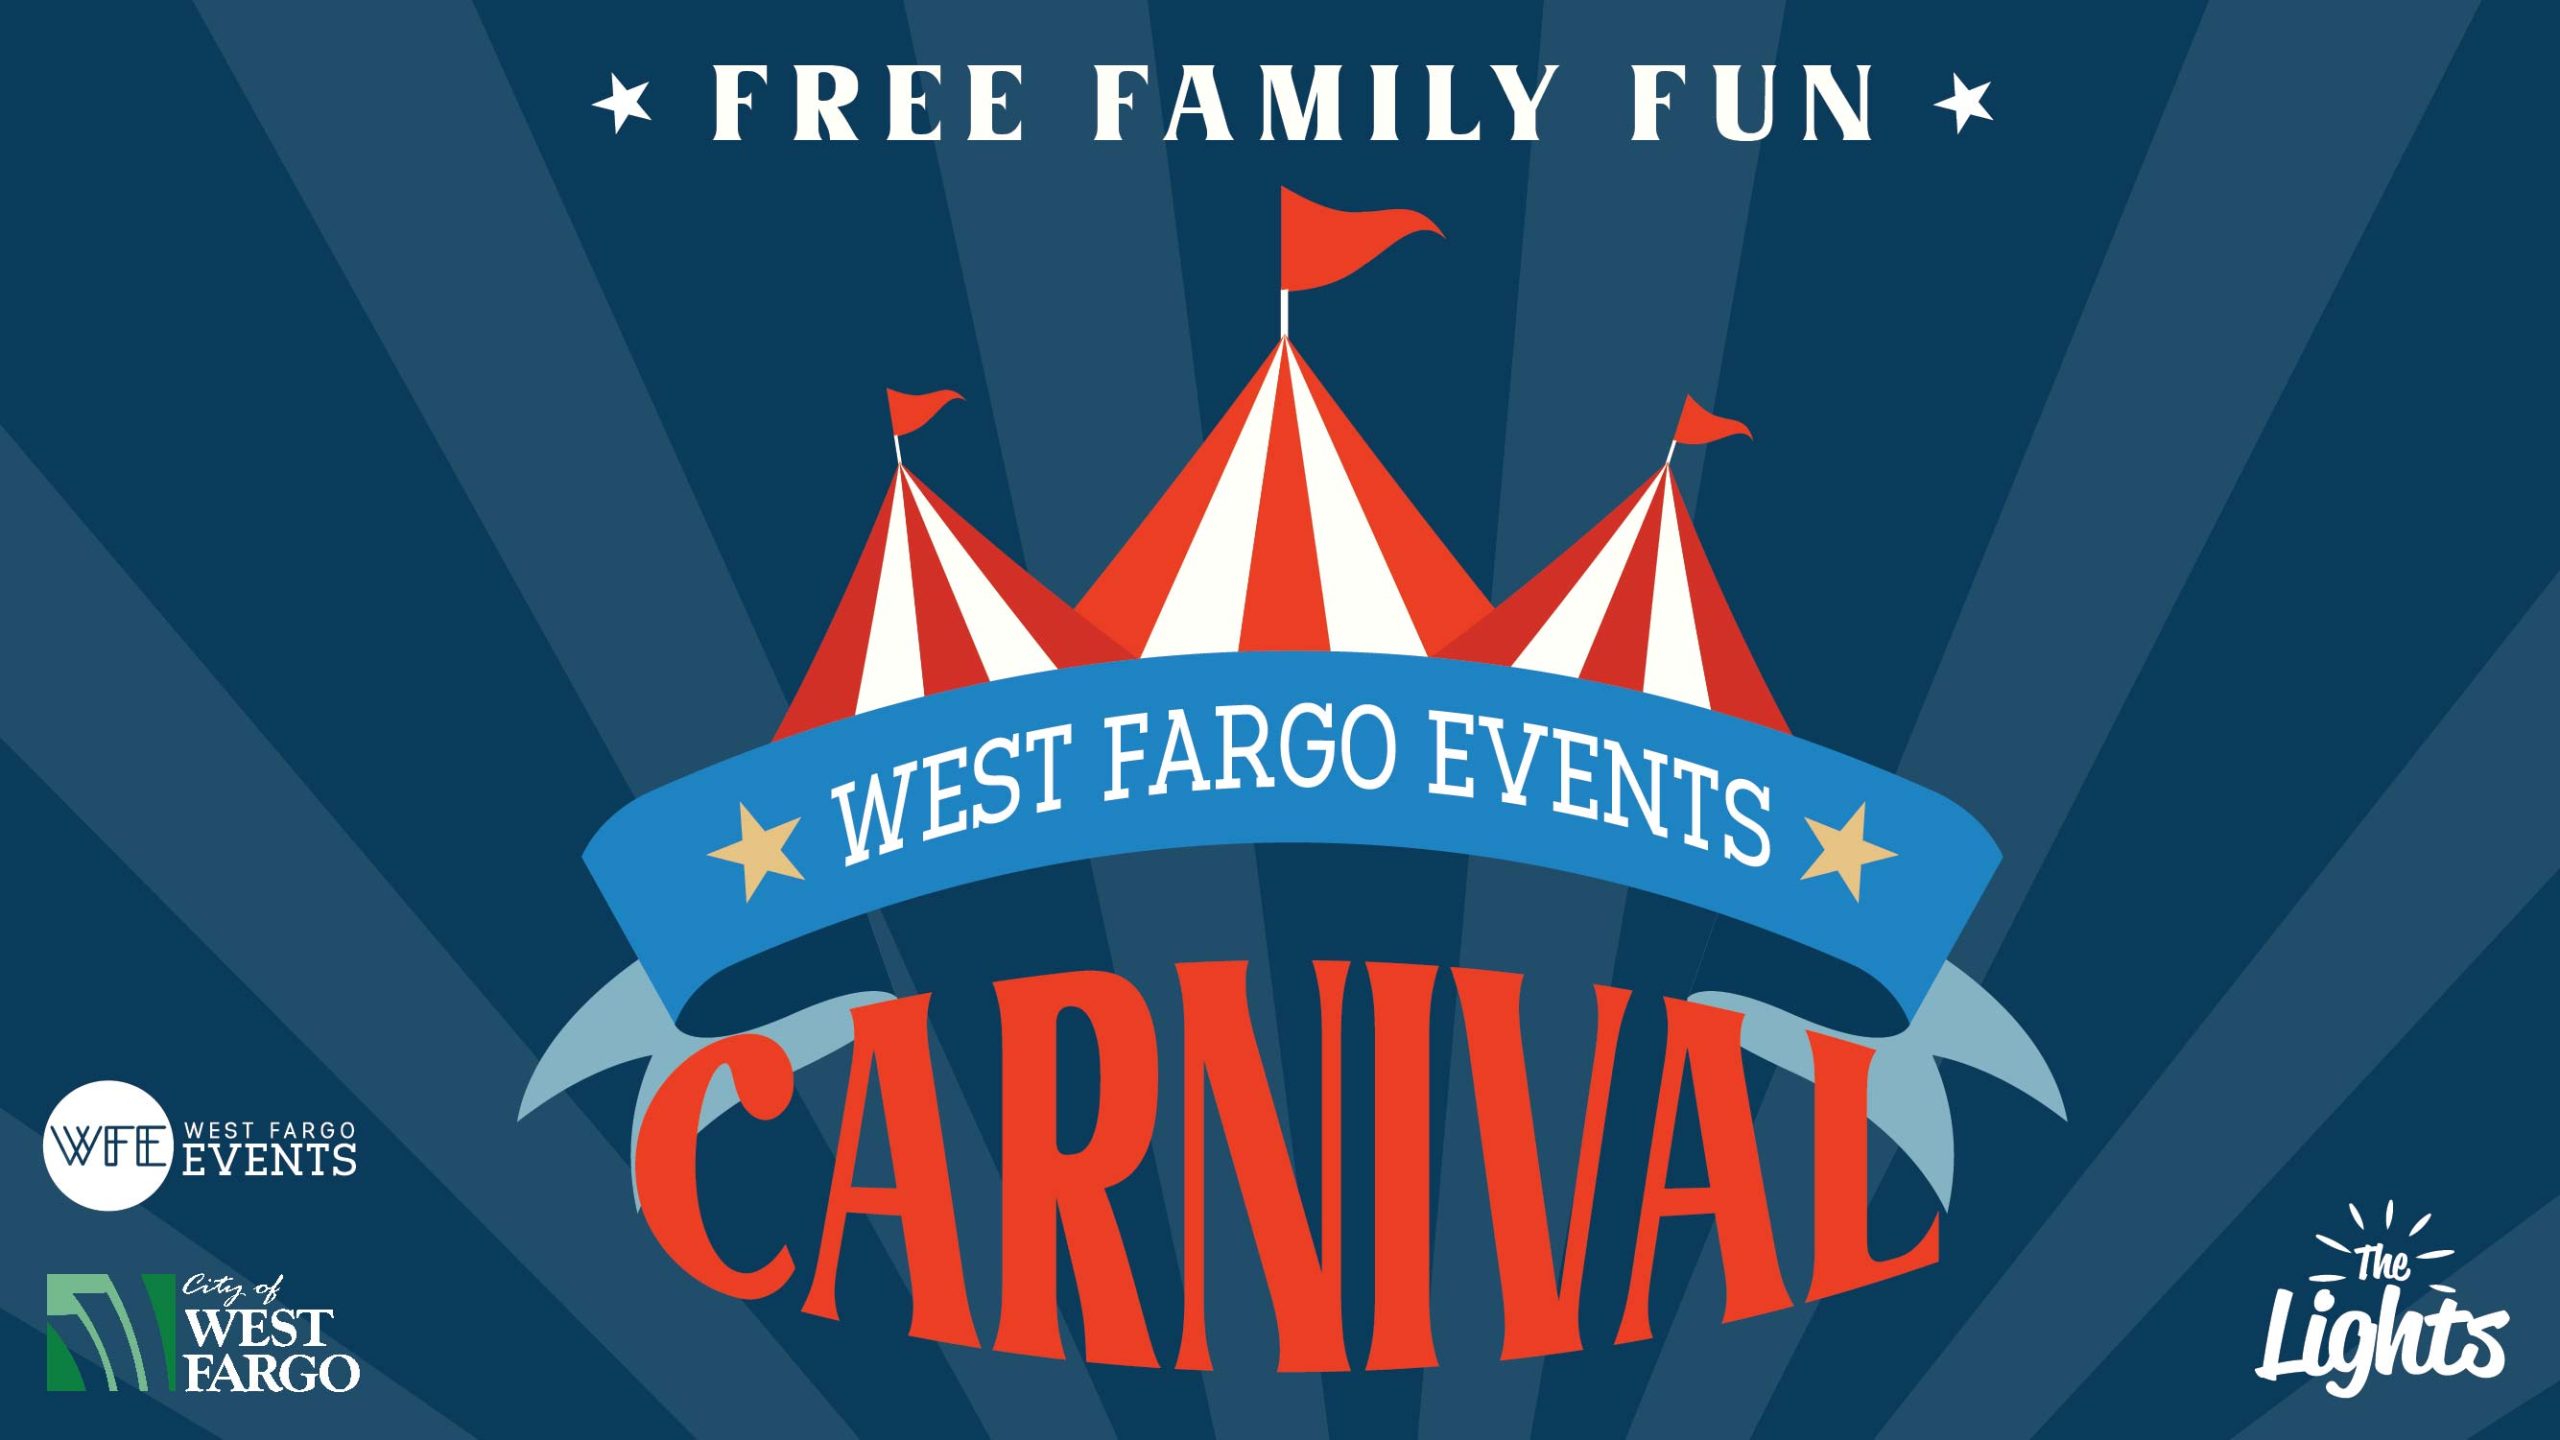 WEST FARGO EVENTS CARNIVAL